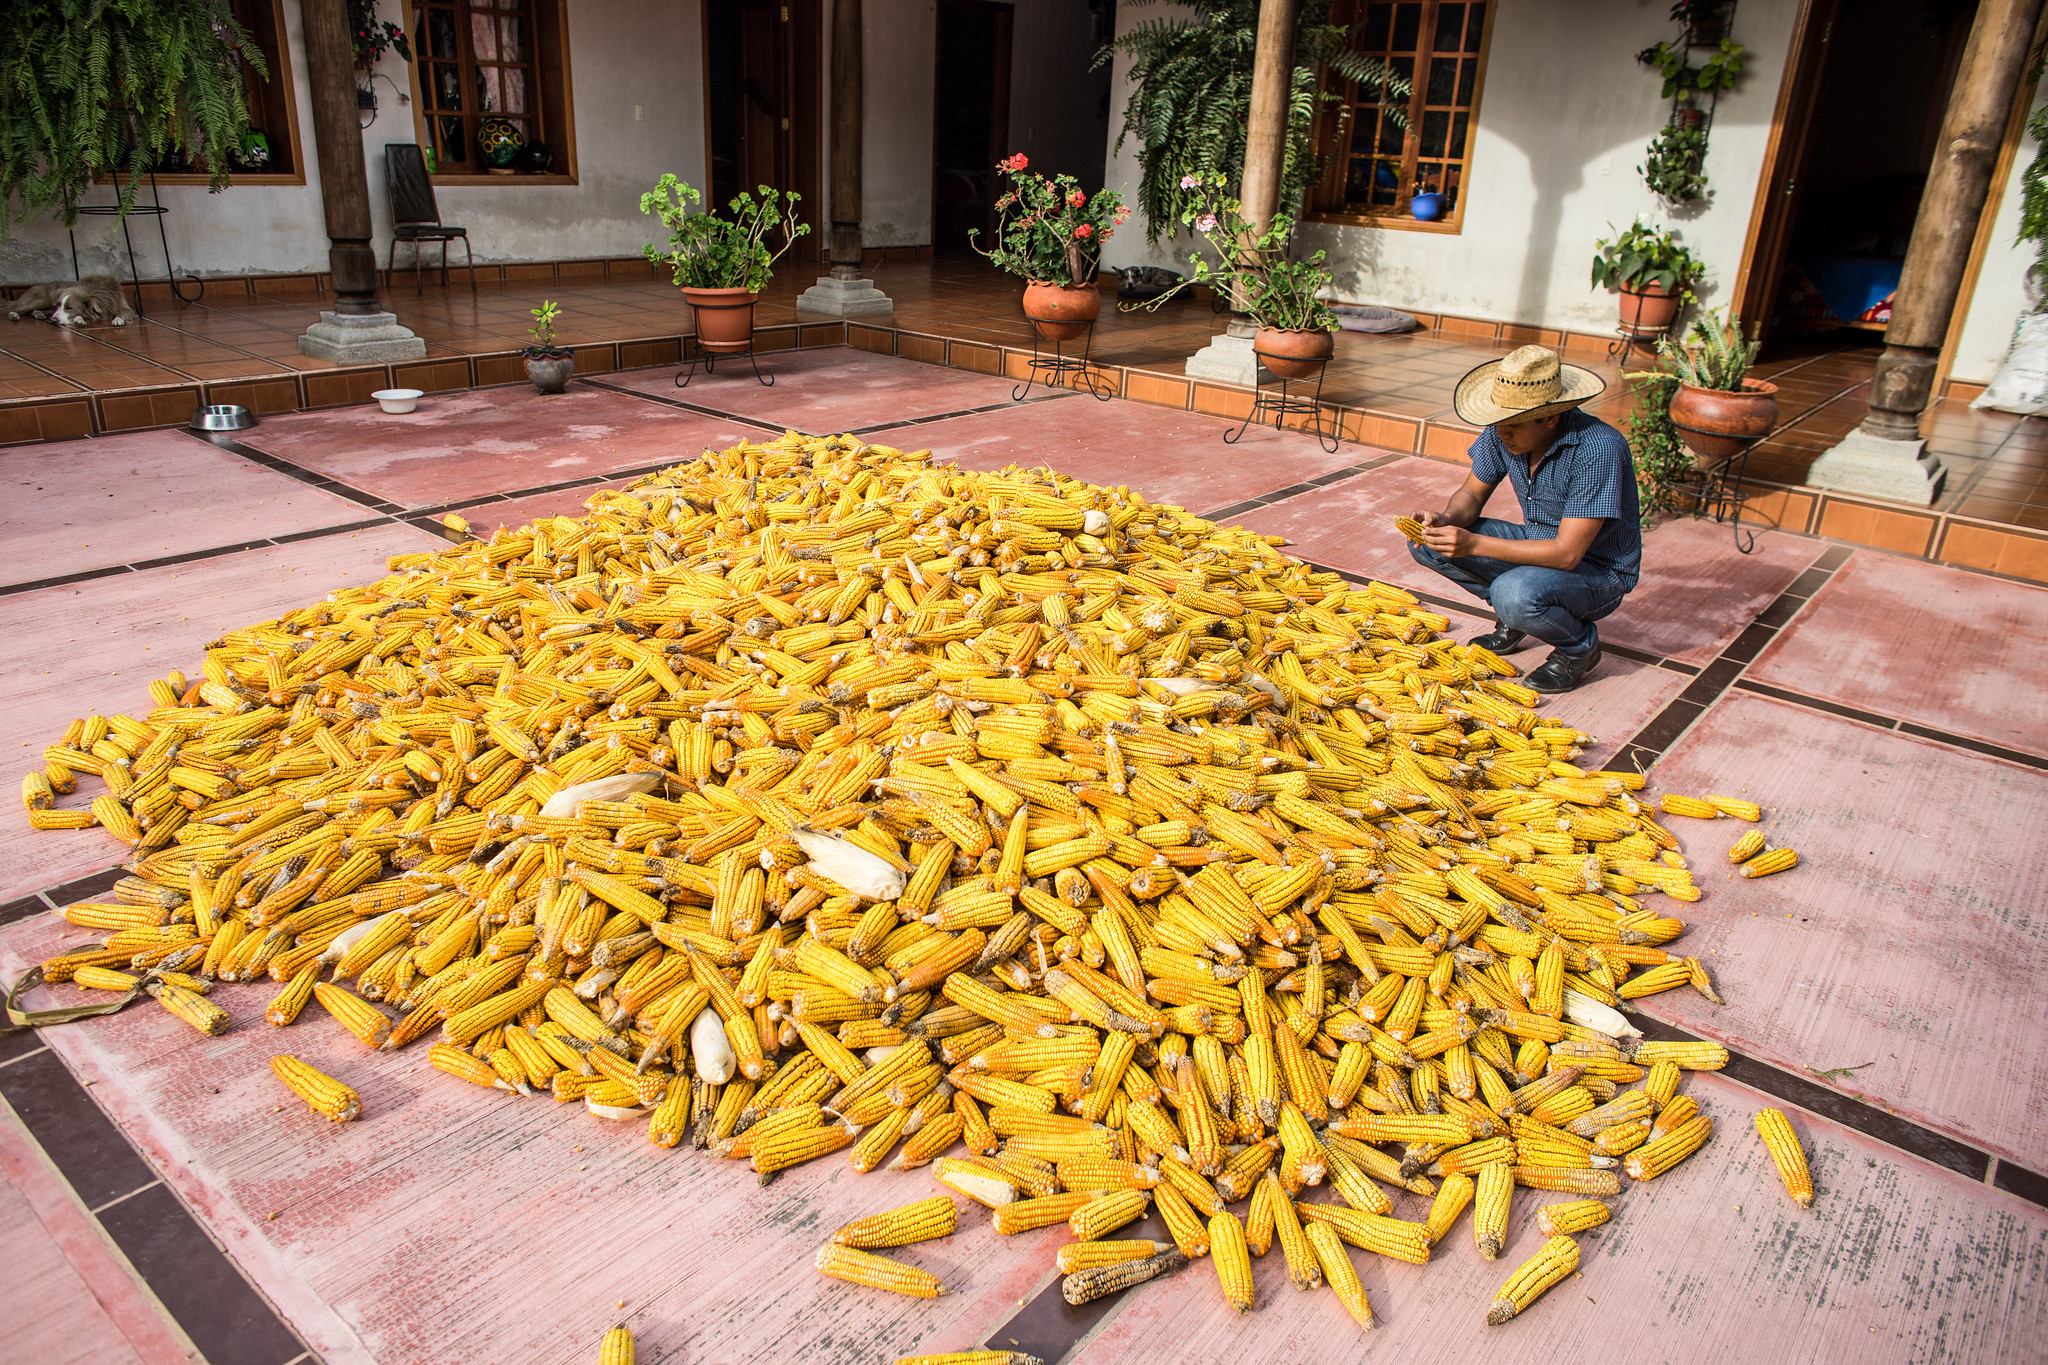 Humberto Aguilar Parada examines cobs of freshly harvested maize in the courtyard of Marilu Meza Morales ranch in Comitán, Chiapas, Mexico. (Photo: P. Lowe/CIMMYT)